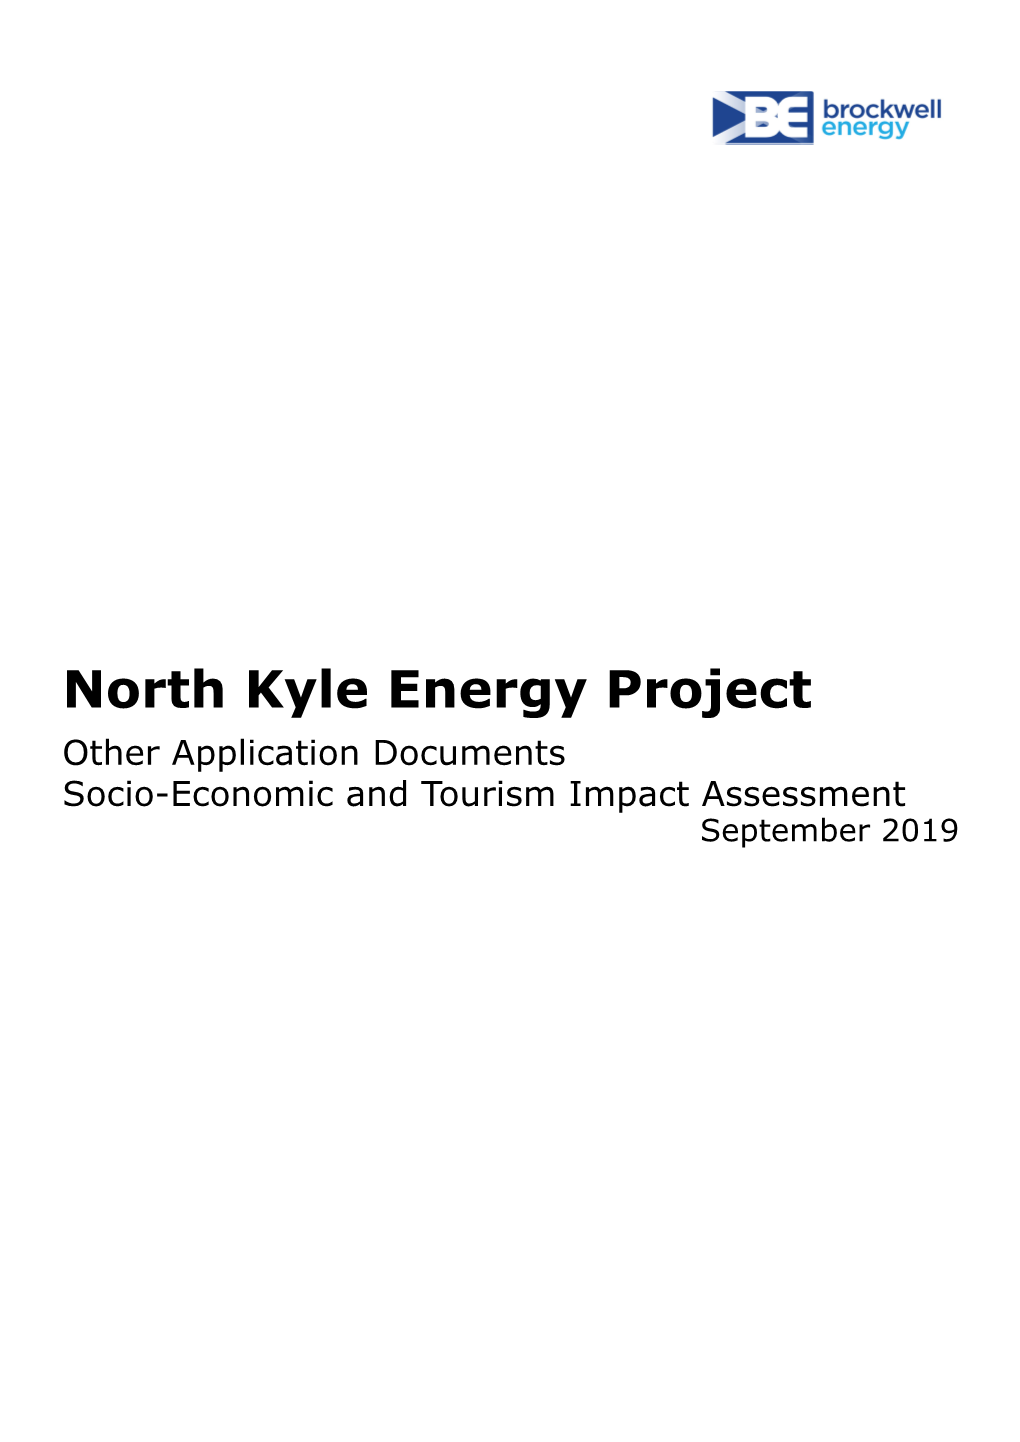 Socio-Economic and Tourism Impact Assessment: North Kyle Energy Project